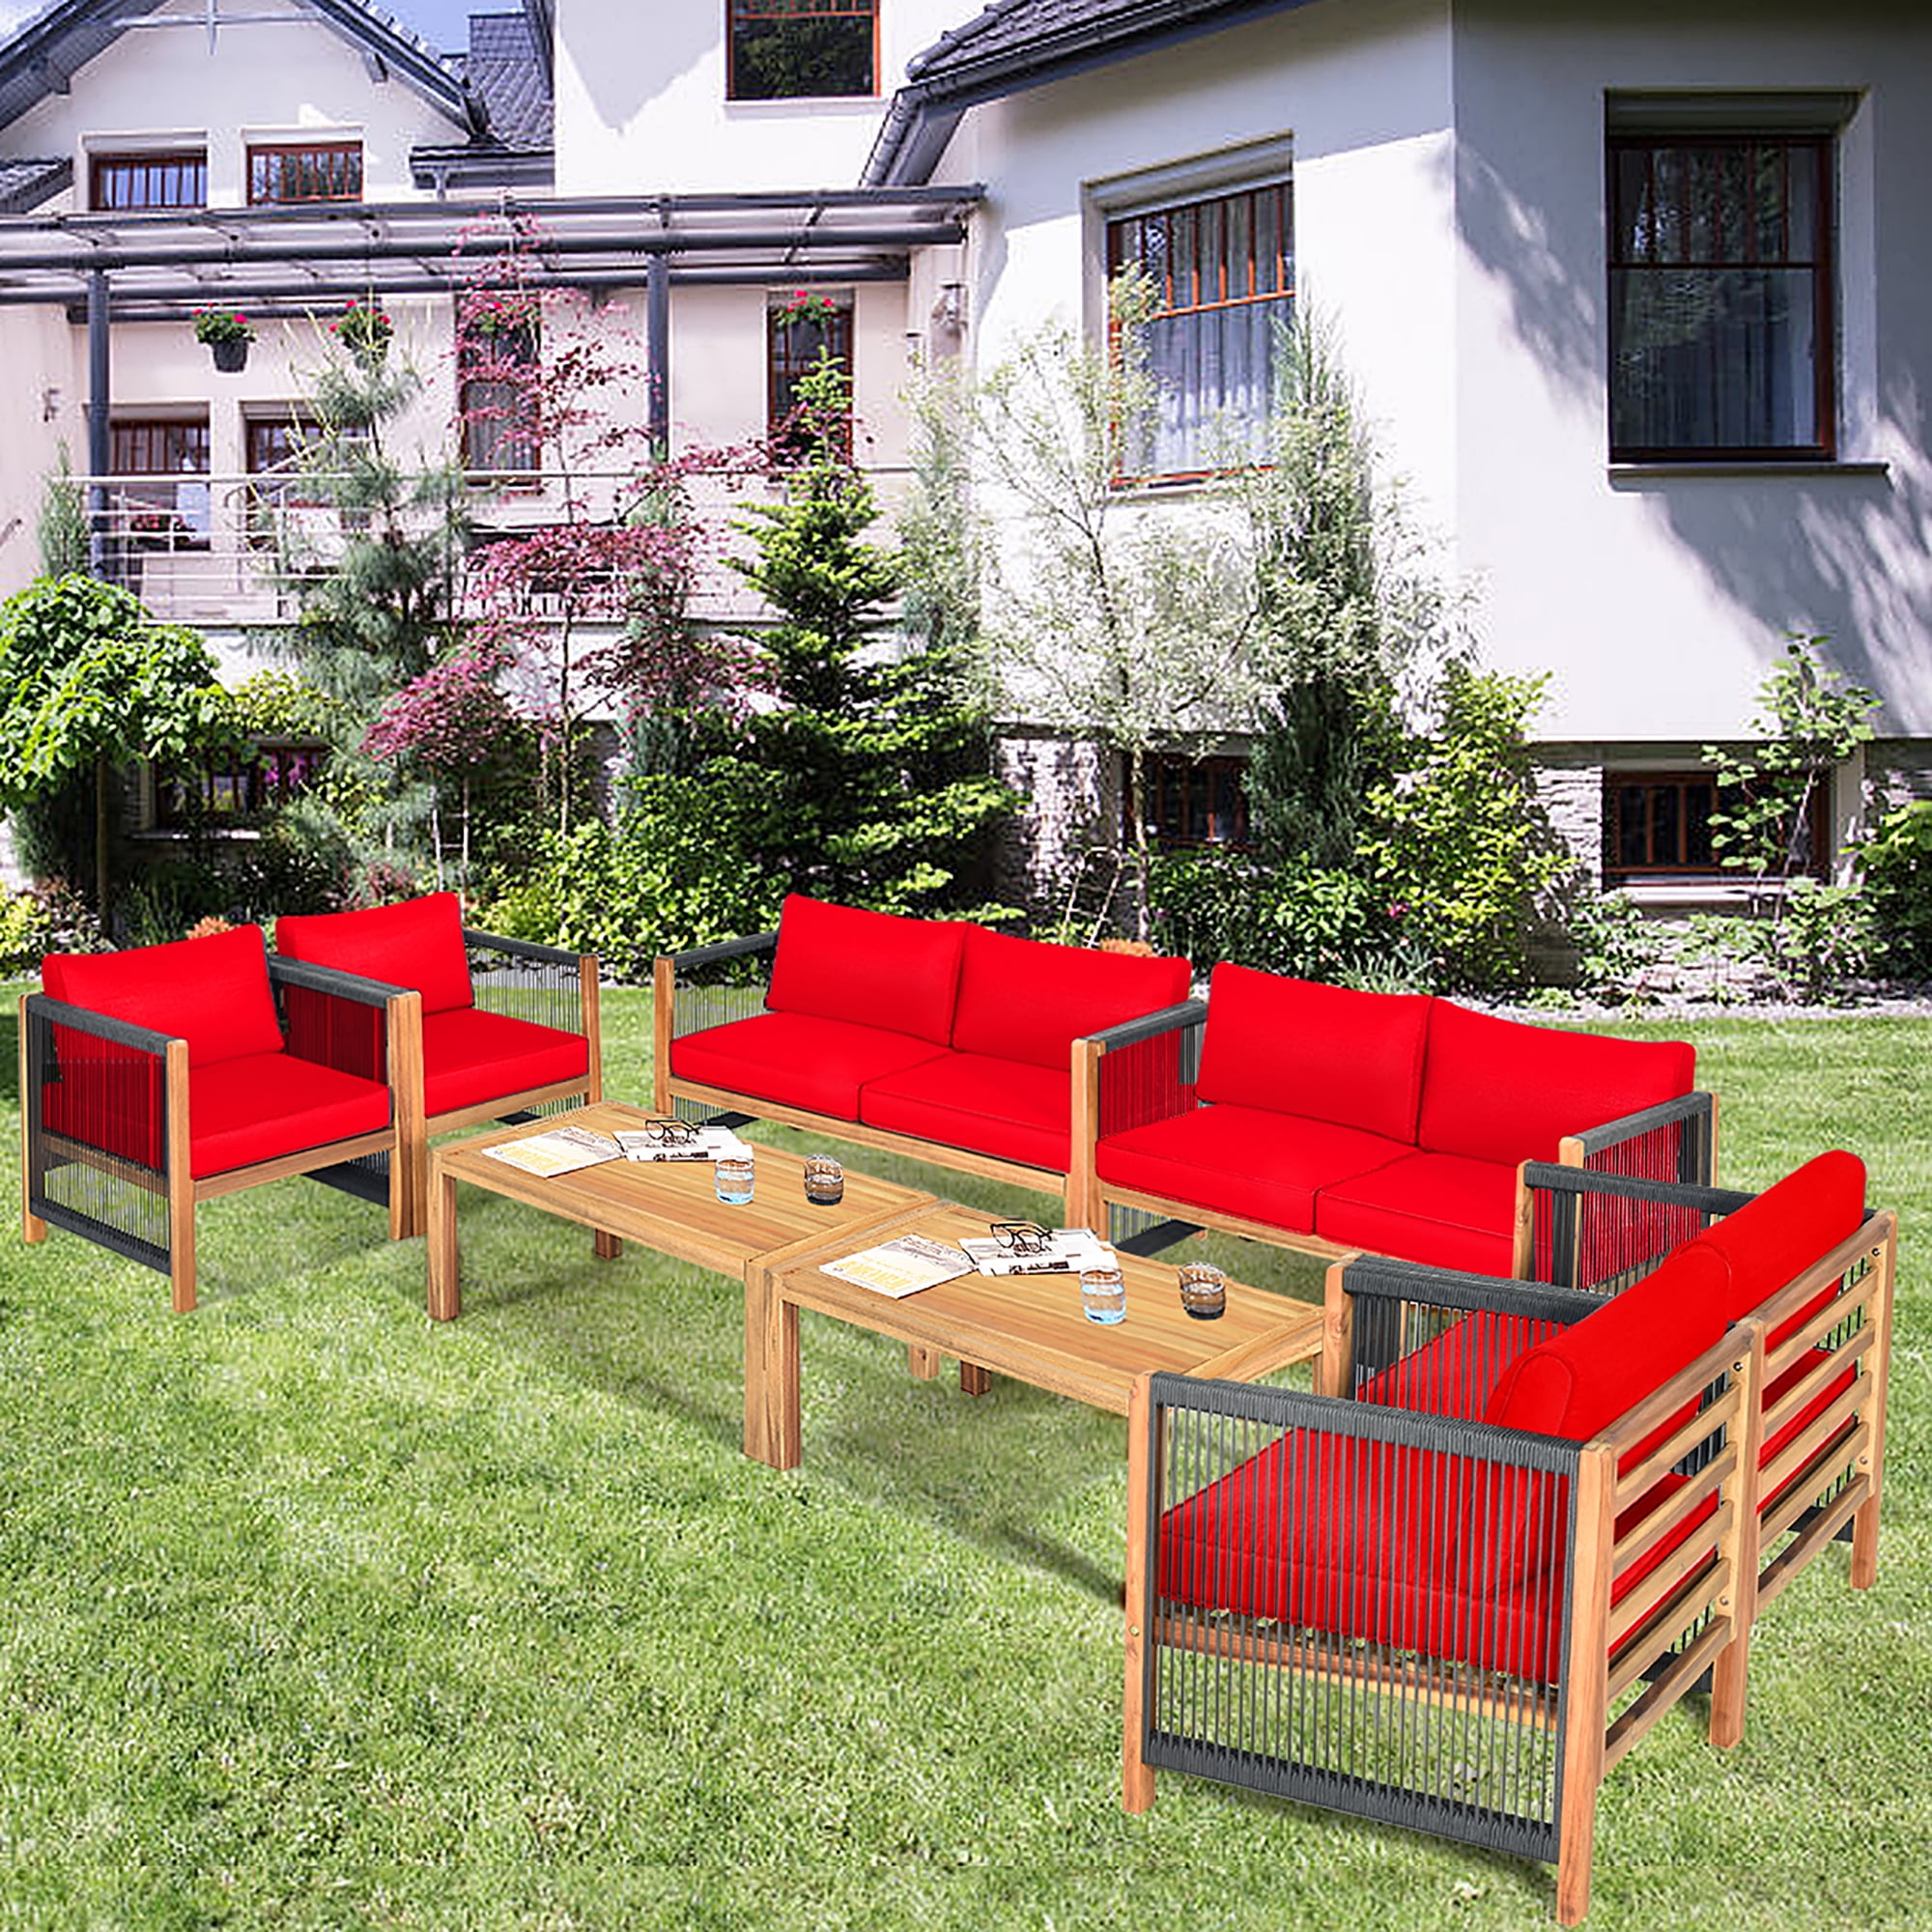 What Wood Is Best for Wood Patio Furniture?